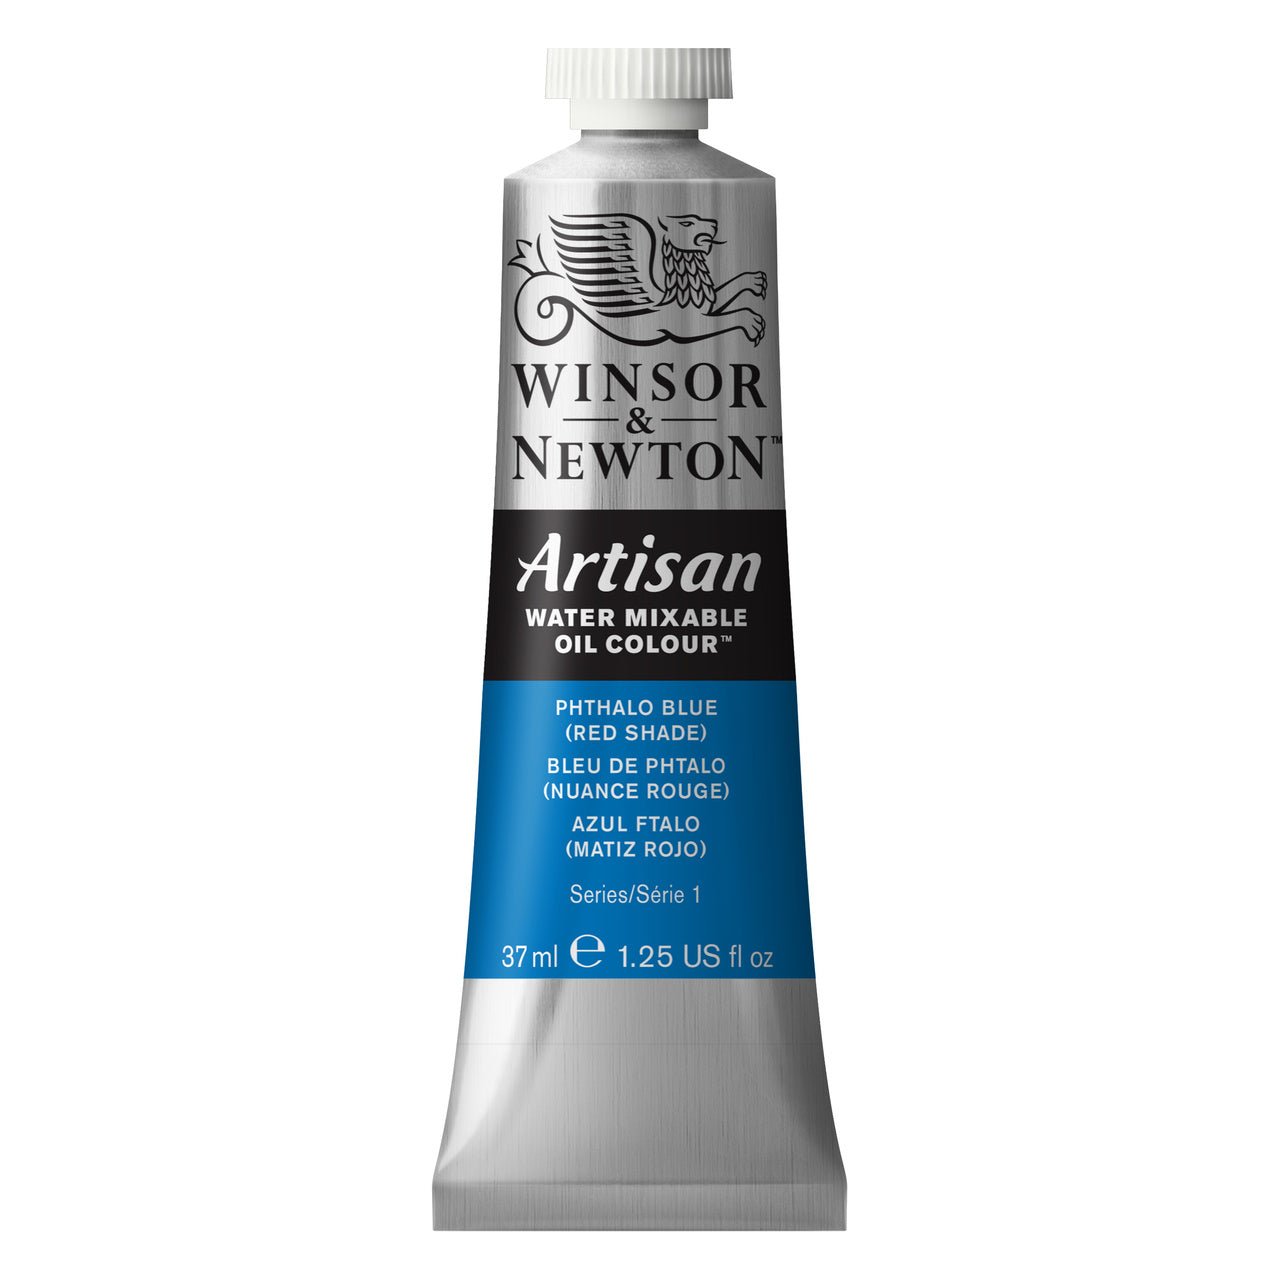 Winsor & Newton Artisan Water Mixable Oil 37ml - Phthalo Blue - merriartist.com